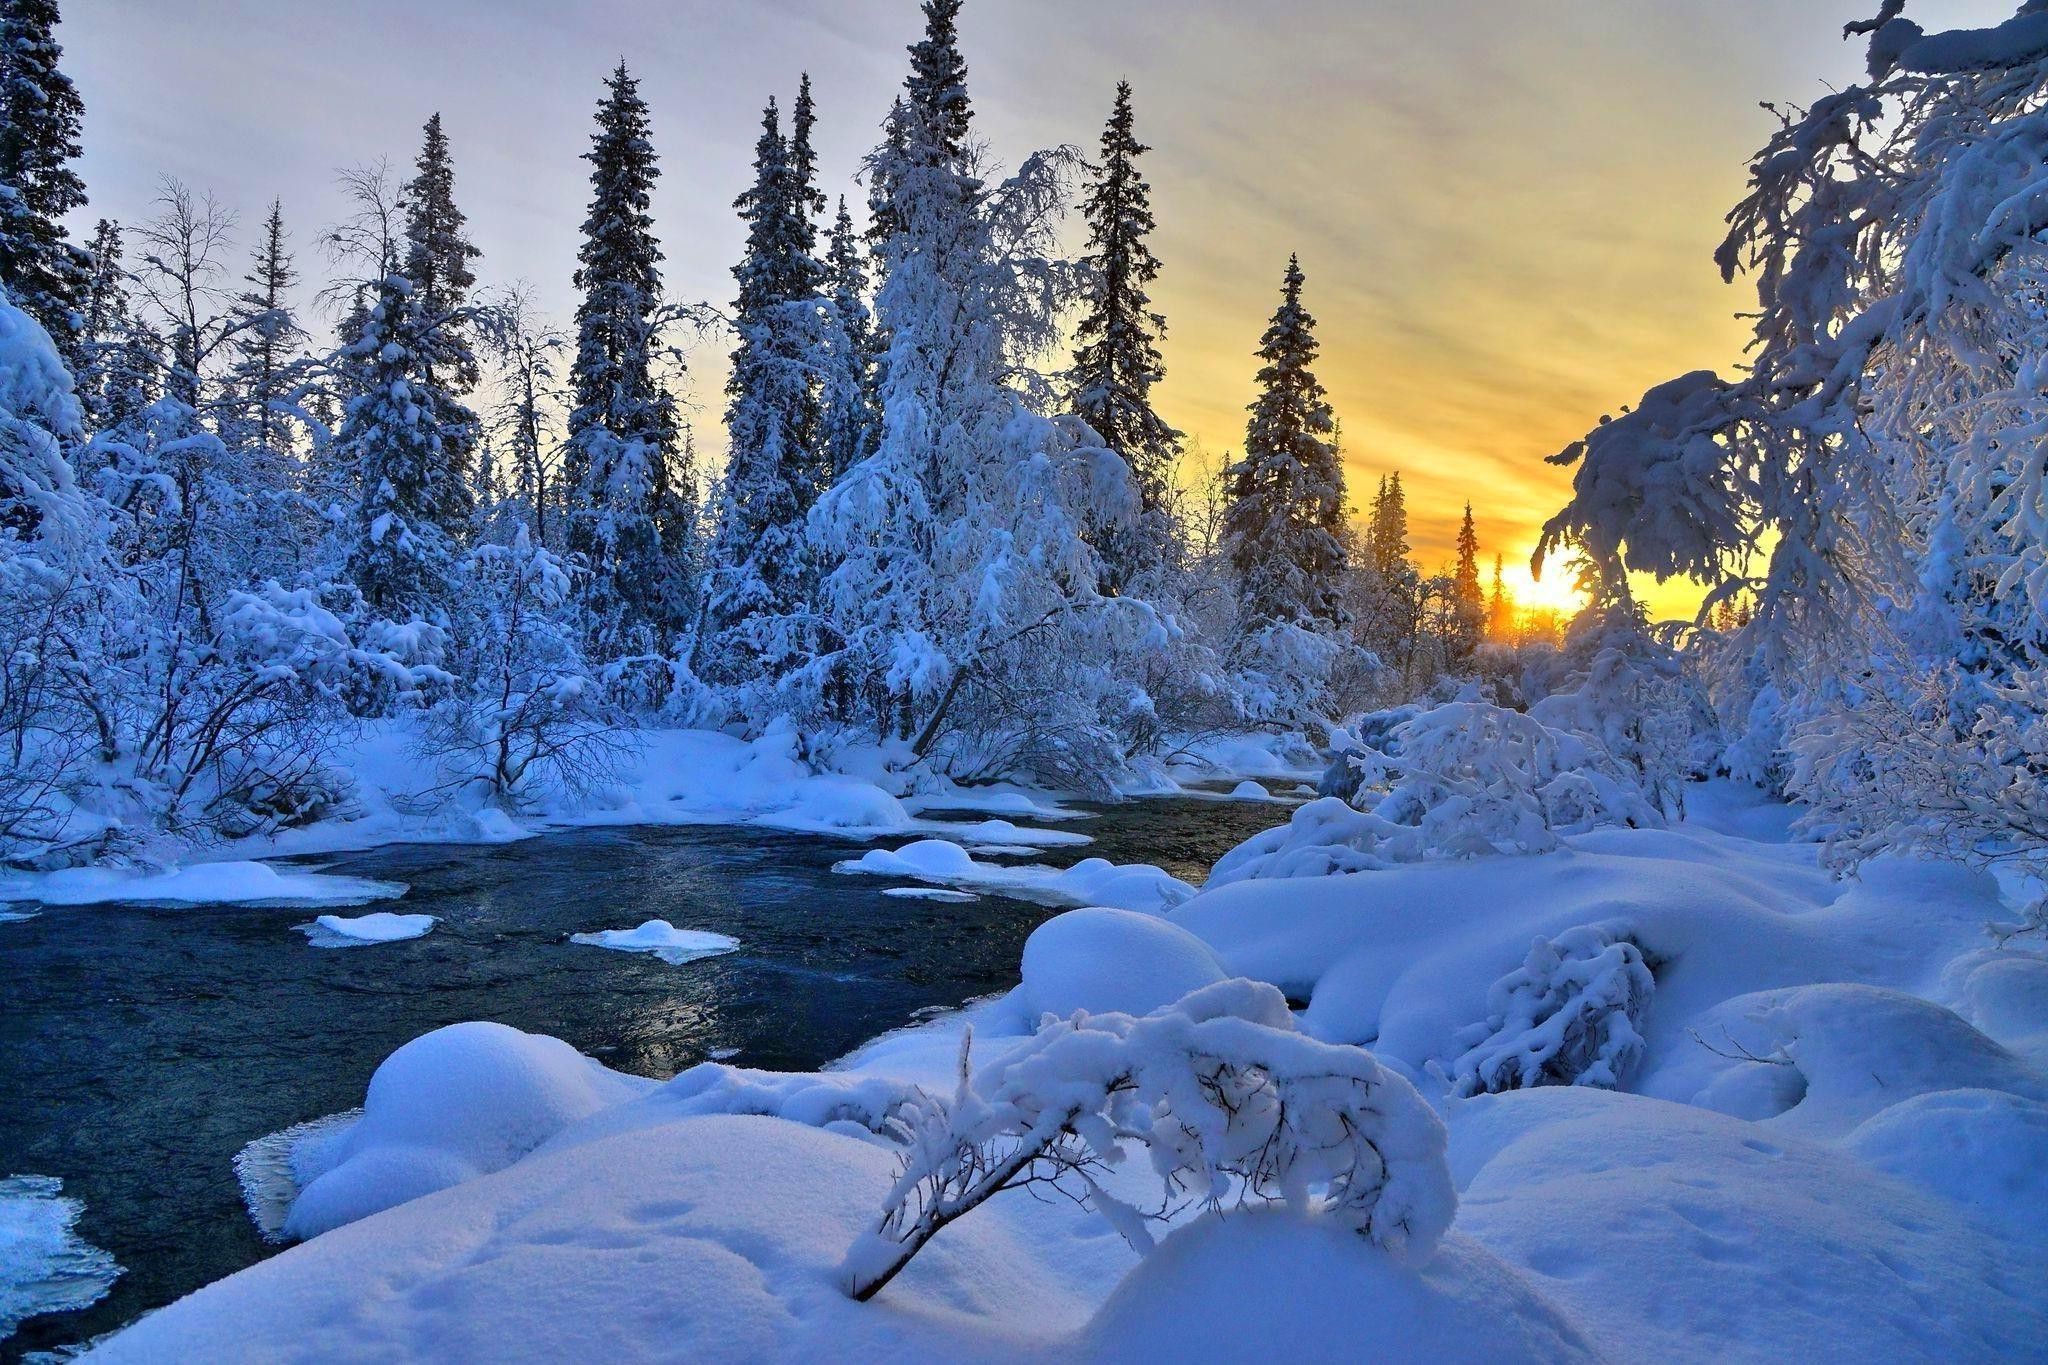 General 2048x1365 nature river winter cold snow ice outdoors sunlight